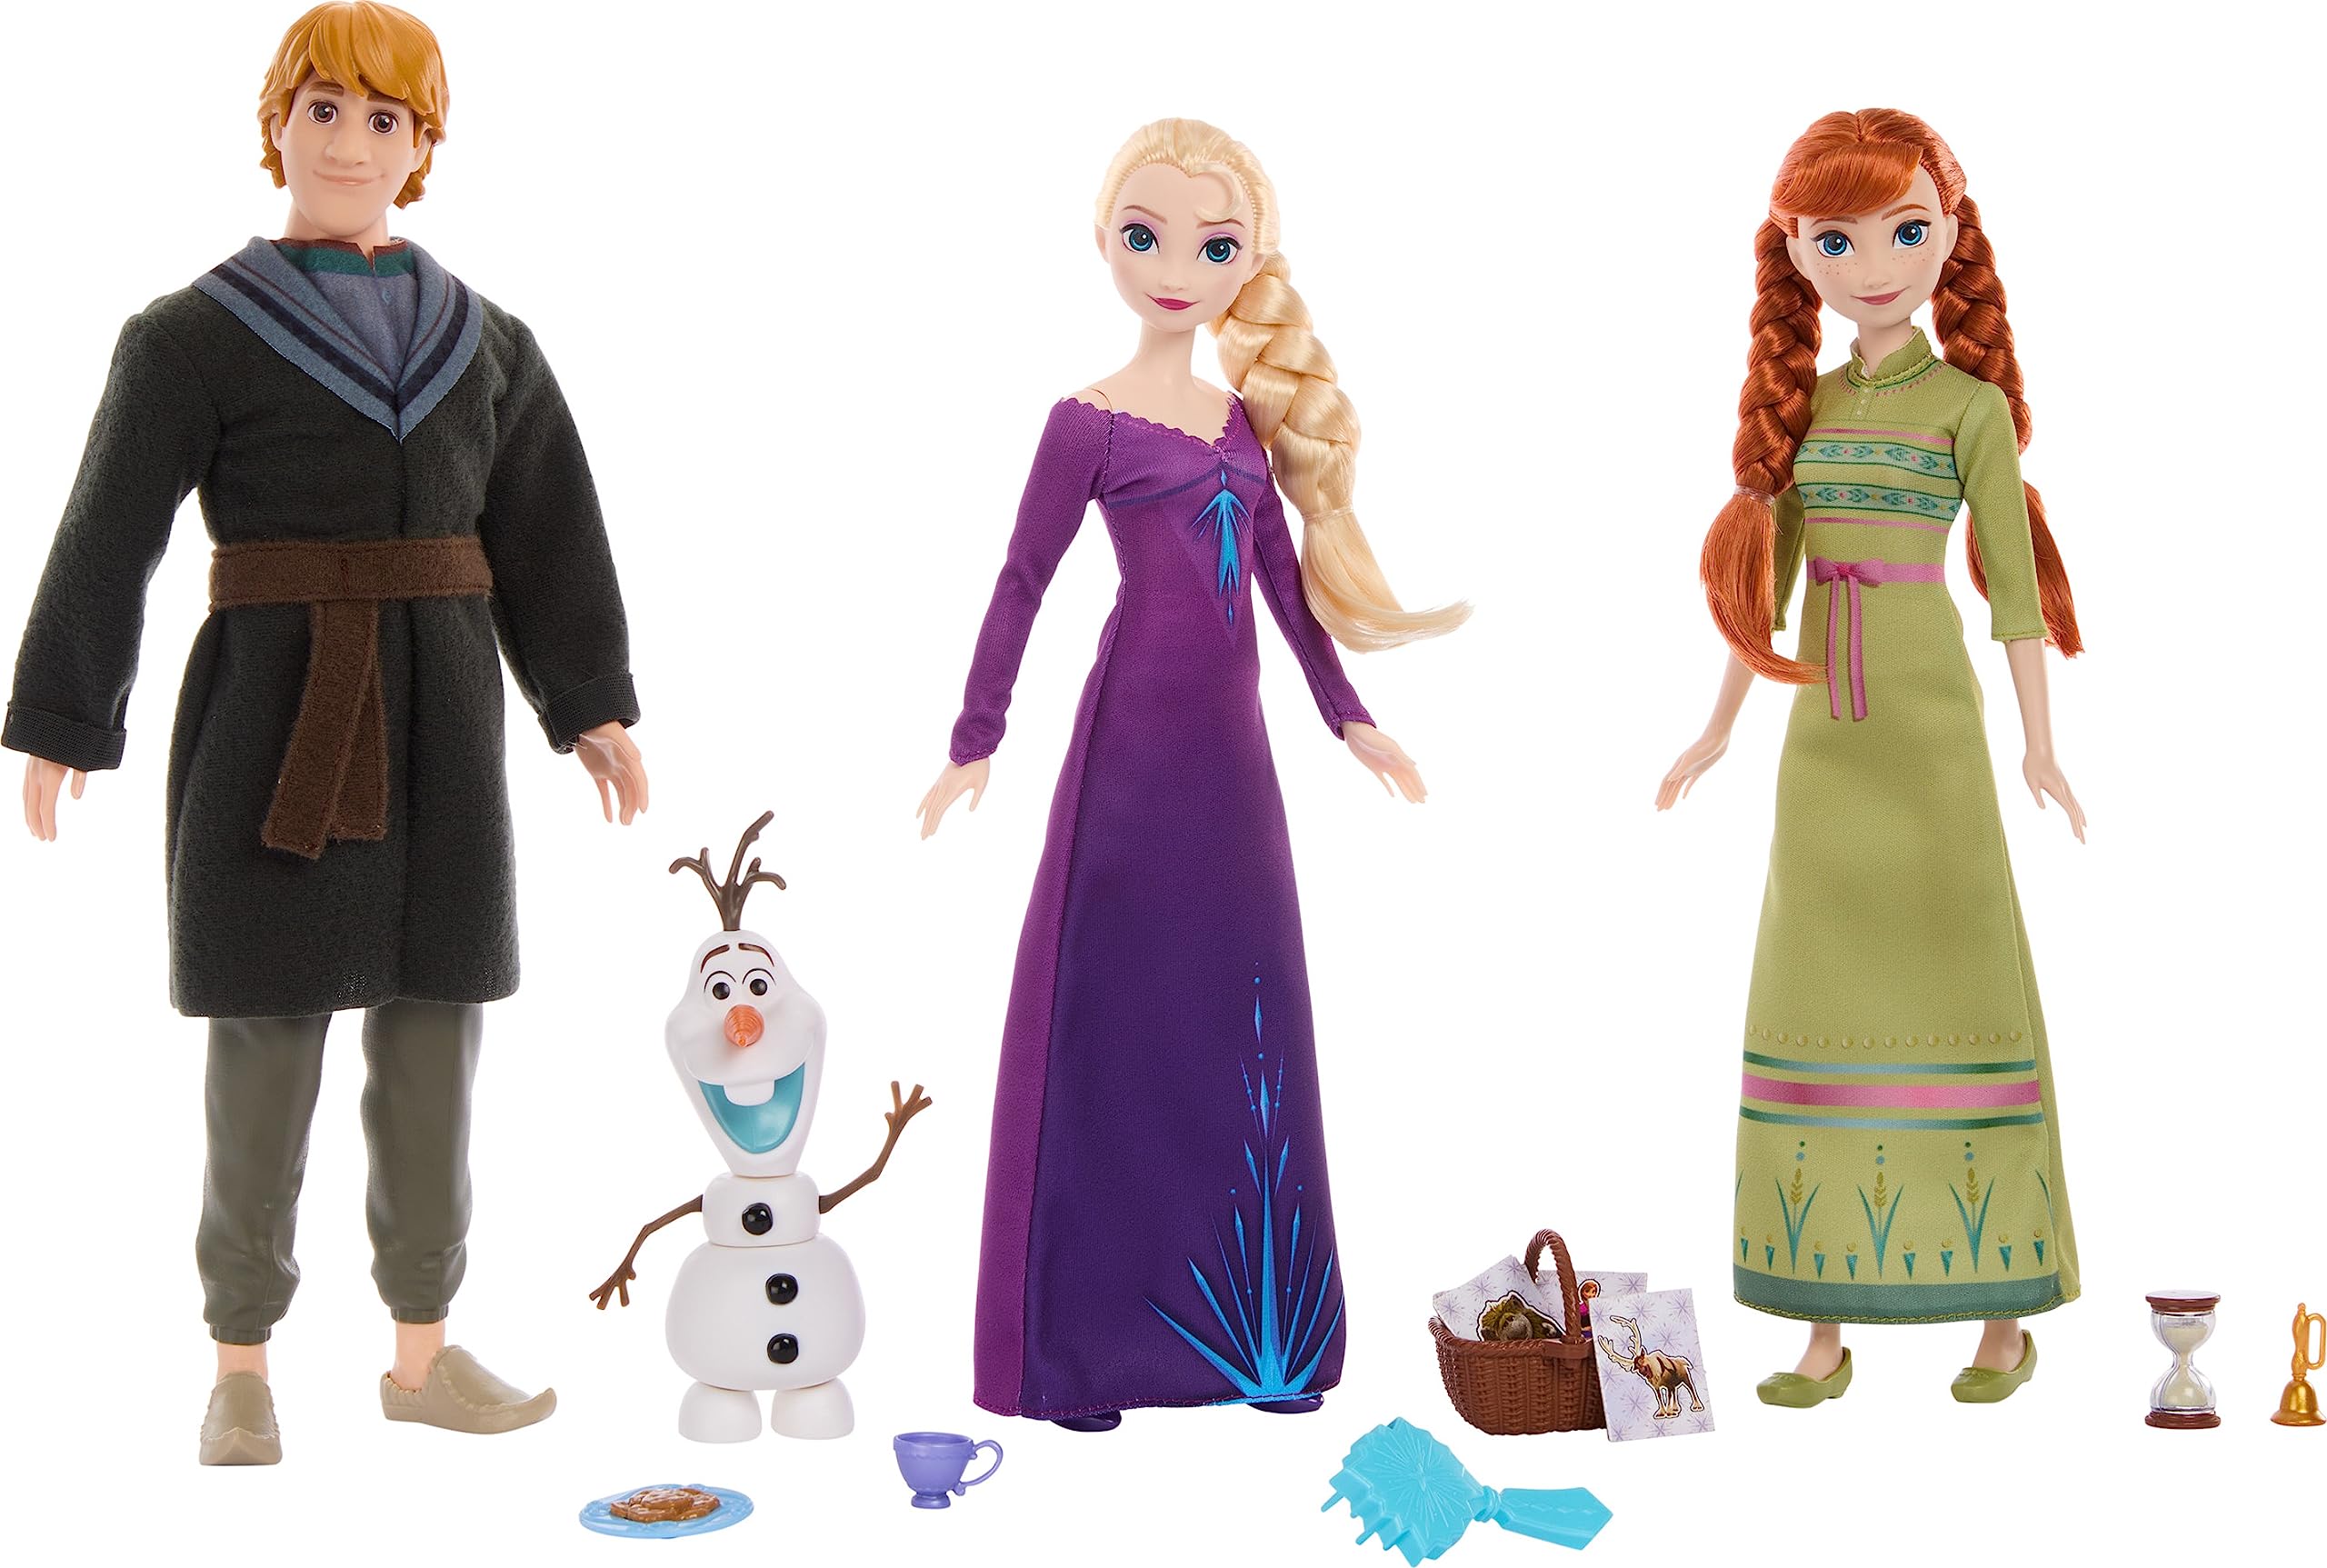 Disney Frozen 3-Doll Charades Set with Fashion Dolls Anna, Elsa and Kristoff, Plus Posable Olaf Figure and 12 Accessories from Disney’s Frozen 2